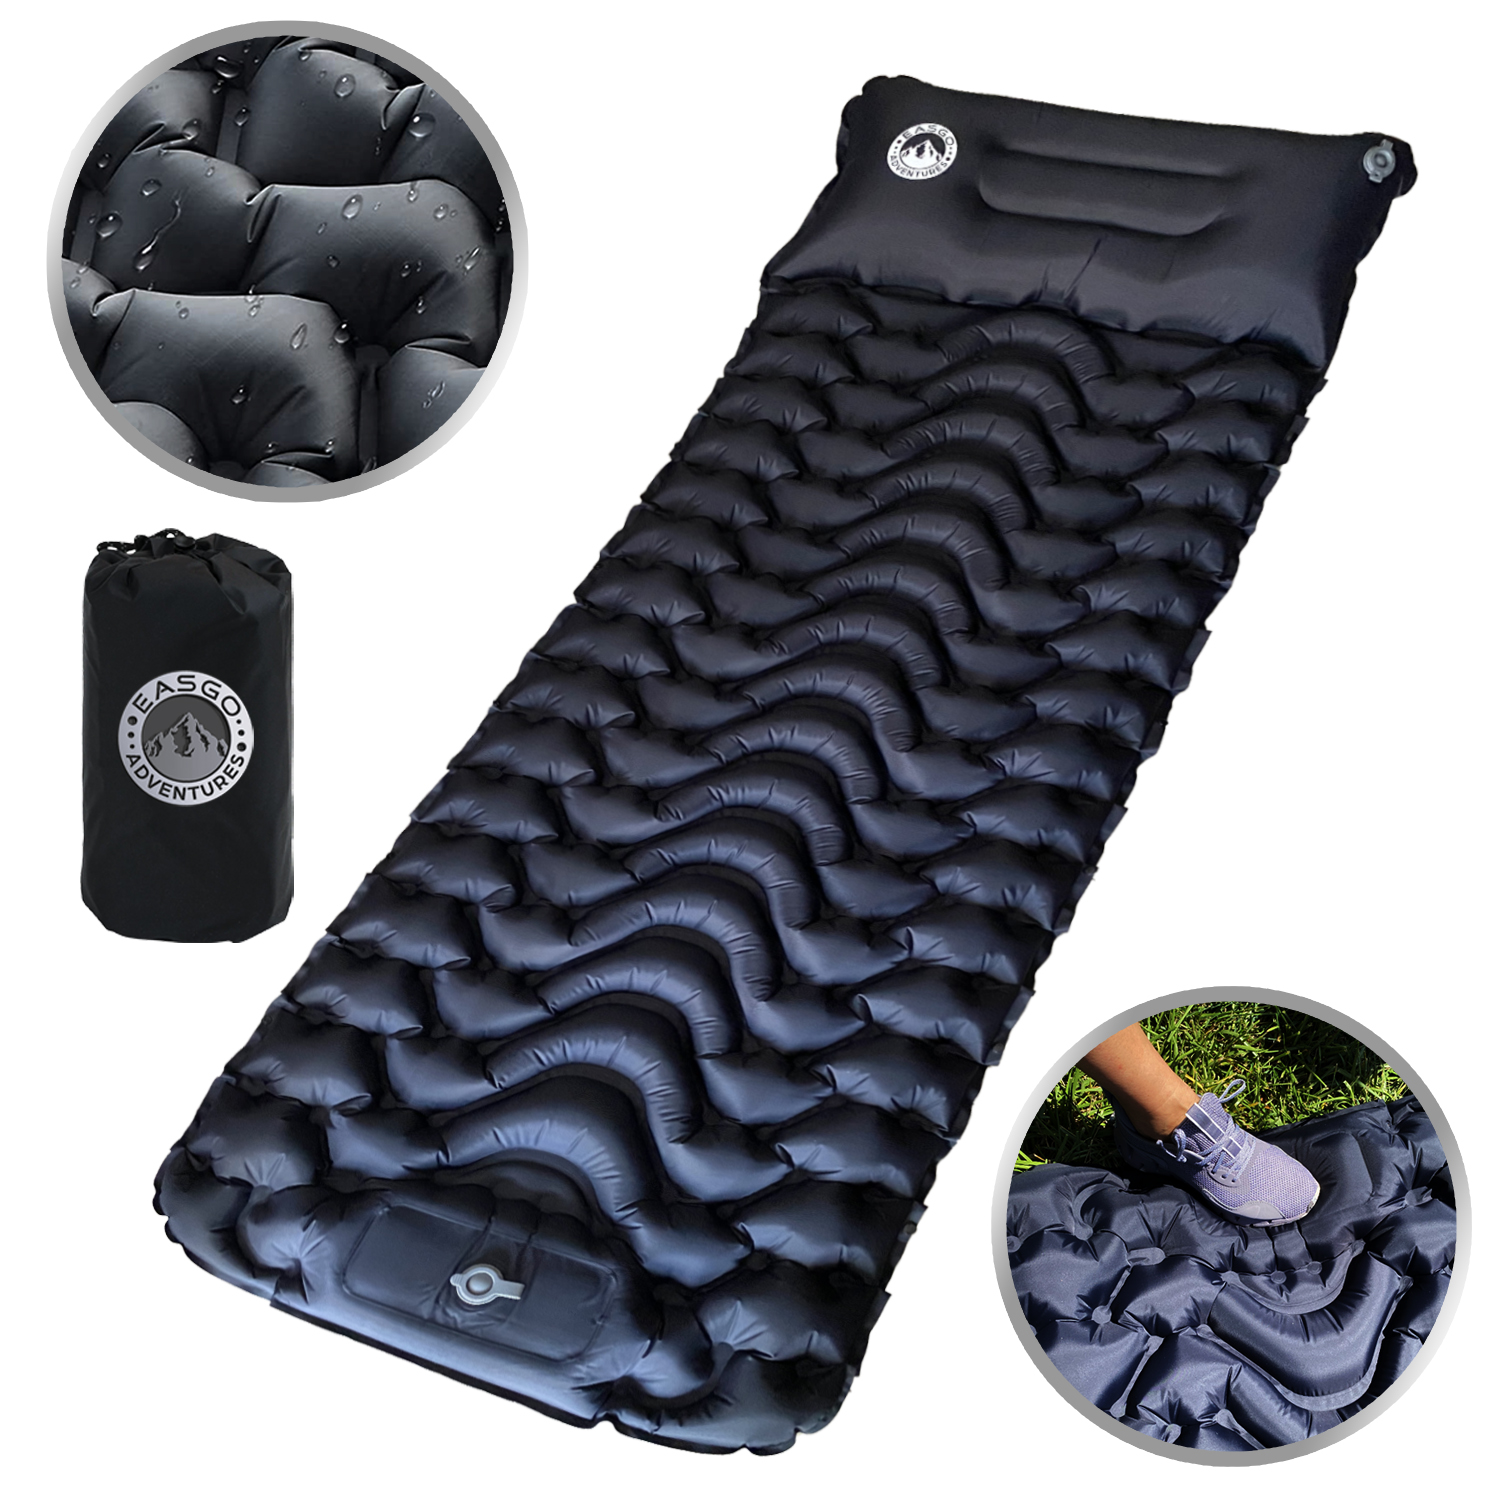 Ultralight Inflatable Sleeping Pad for Camping, Backpacking, Hiking, Travel, Built-In Step Inflating Air Pump, Integrated Pillow, Indoor Outdoor Firm Sleep Support, Compact and Portable, Black - image 1 of 6